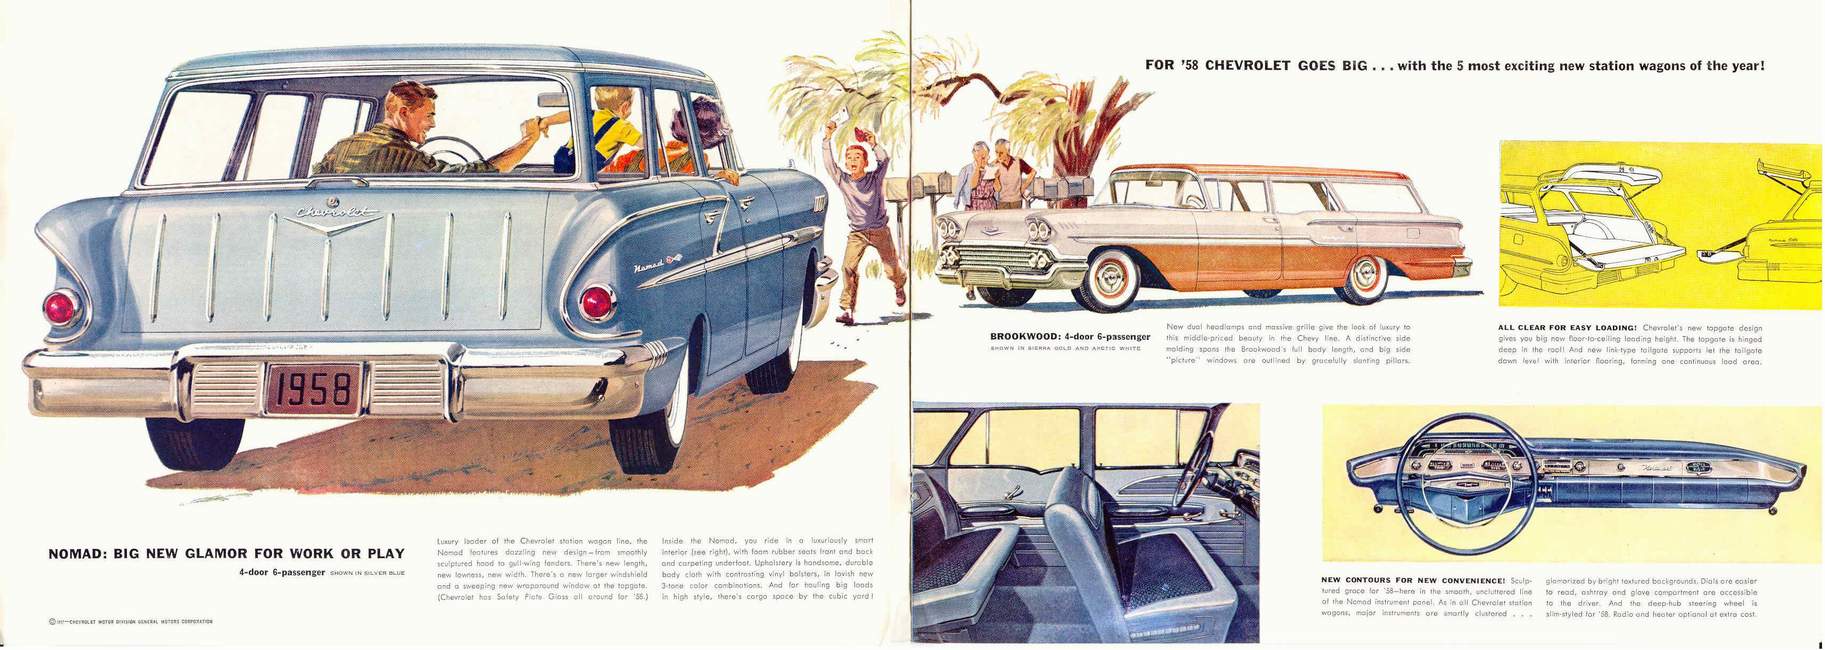 1958 Chevrolet Wagons Brochure Page 4